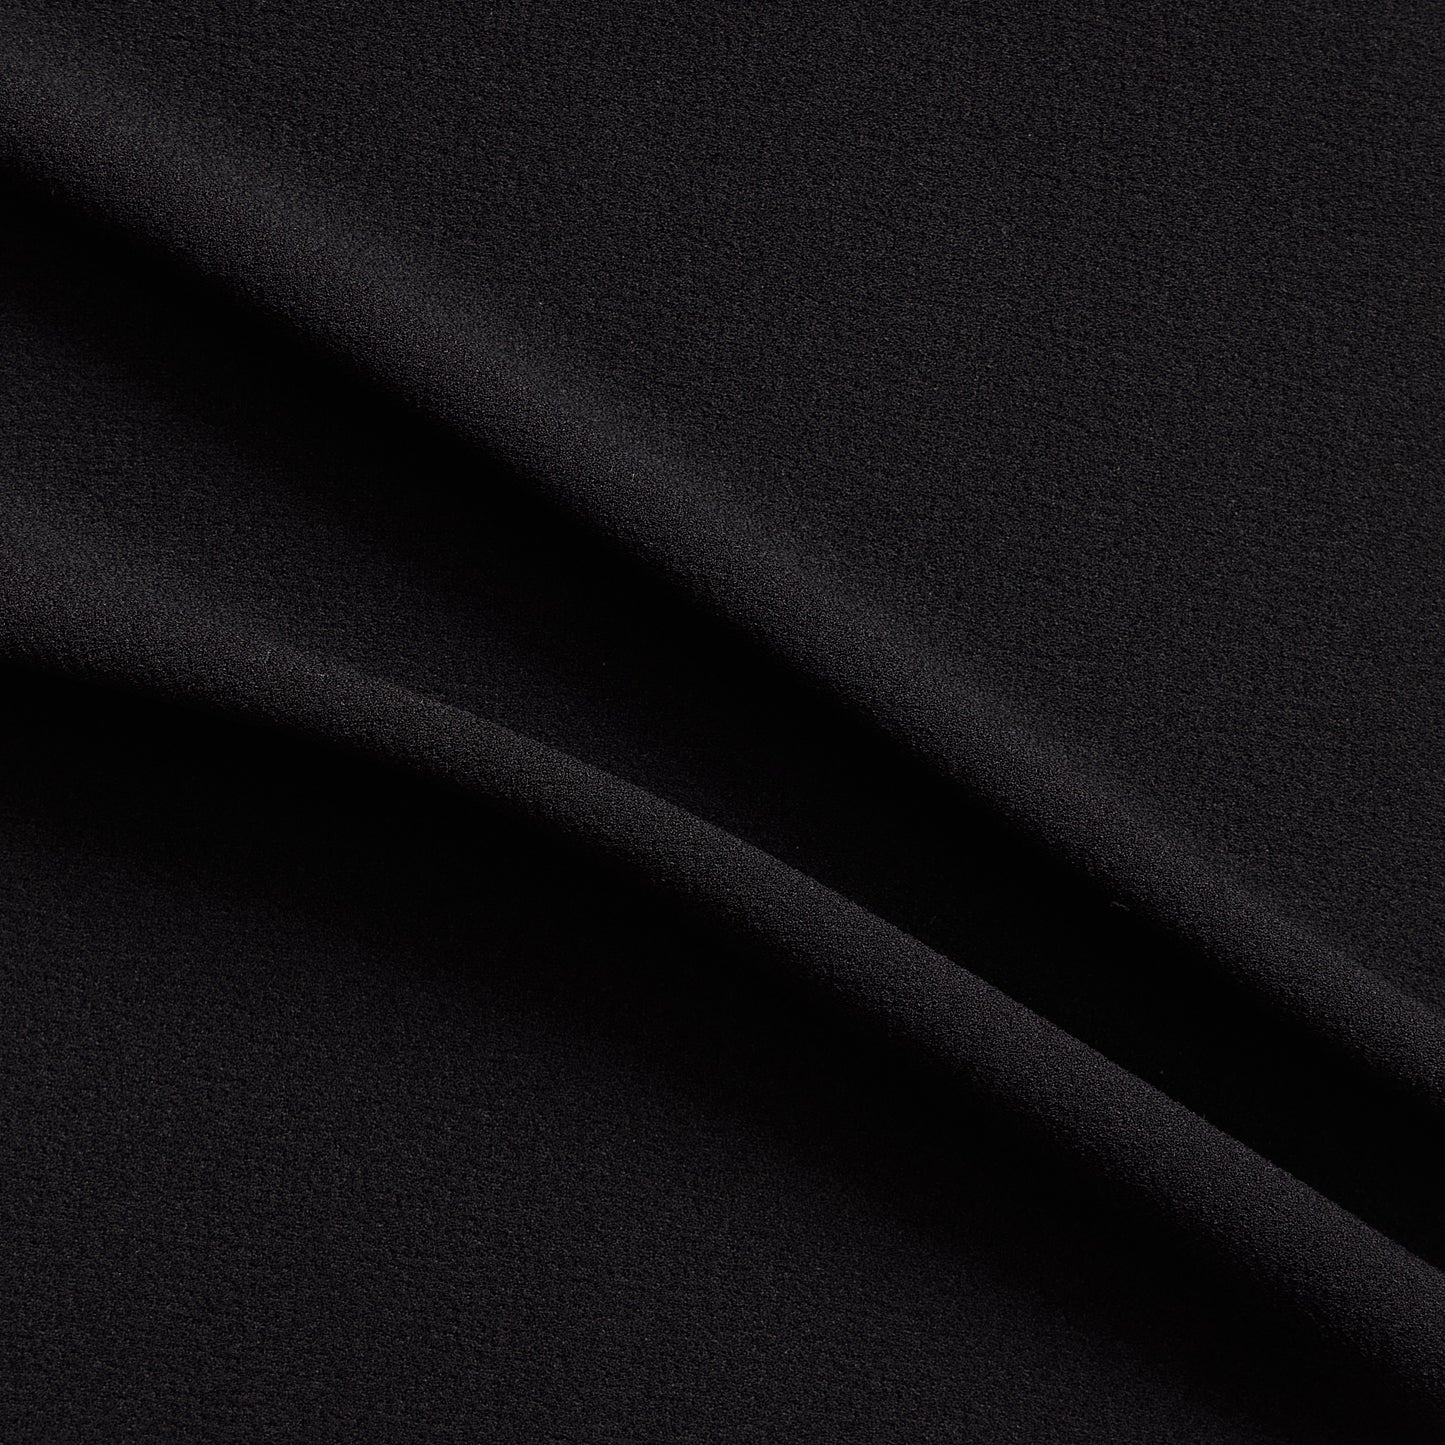 London Crepe presenting the black color version with 2 way stretch knit polyester with spandex